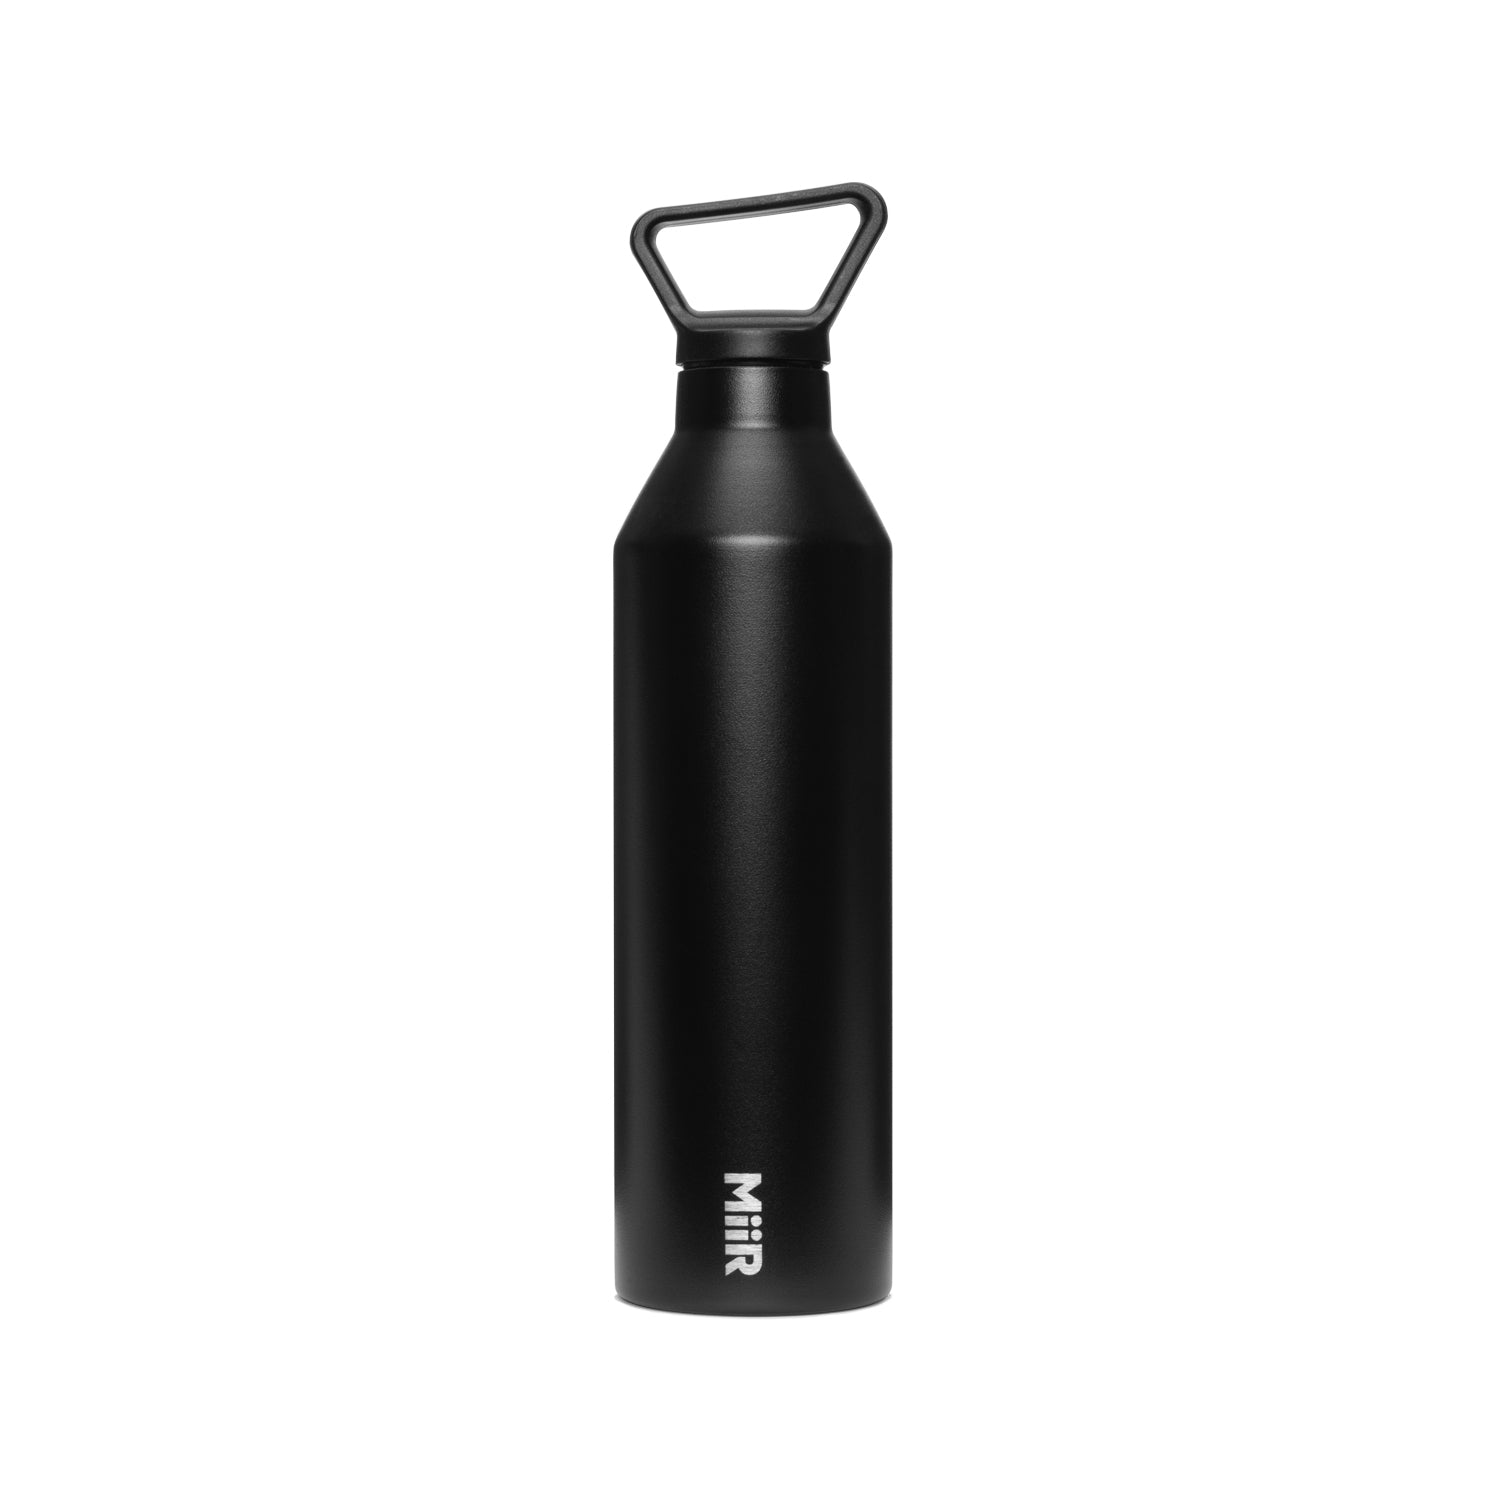 Thermos 24 oz. Stainless Steel Vacuum Insulated Wide Mouth Tumbler - Black